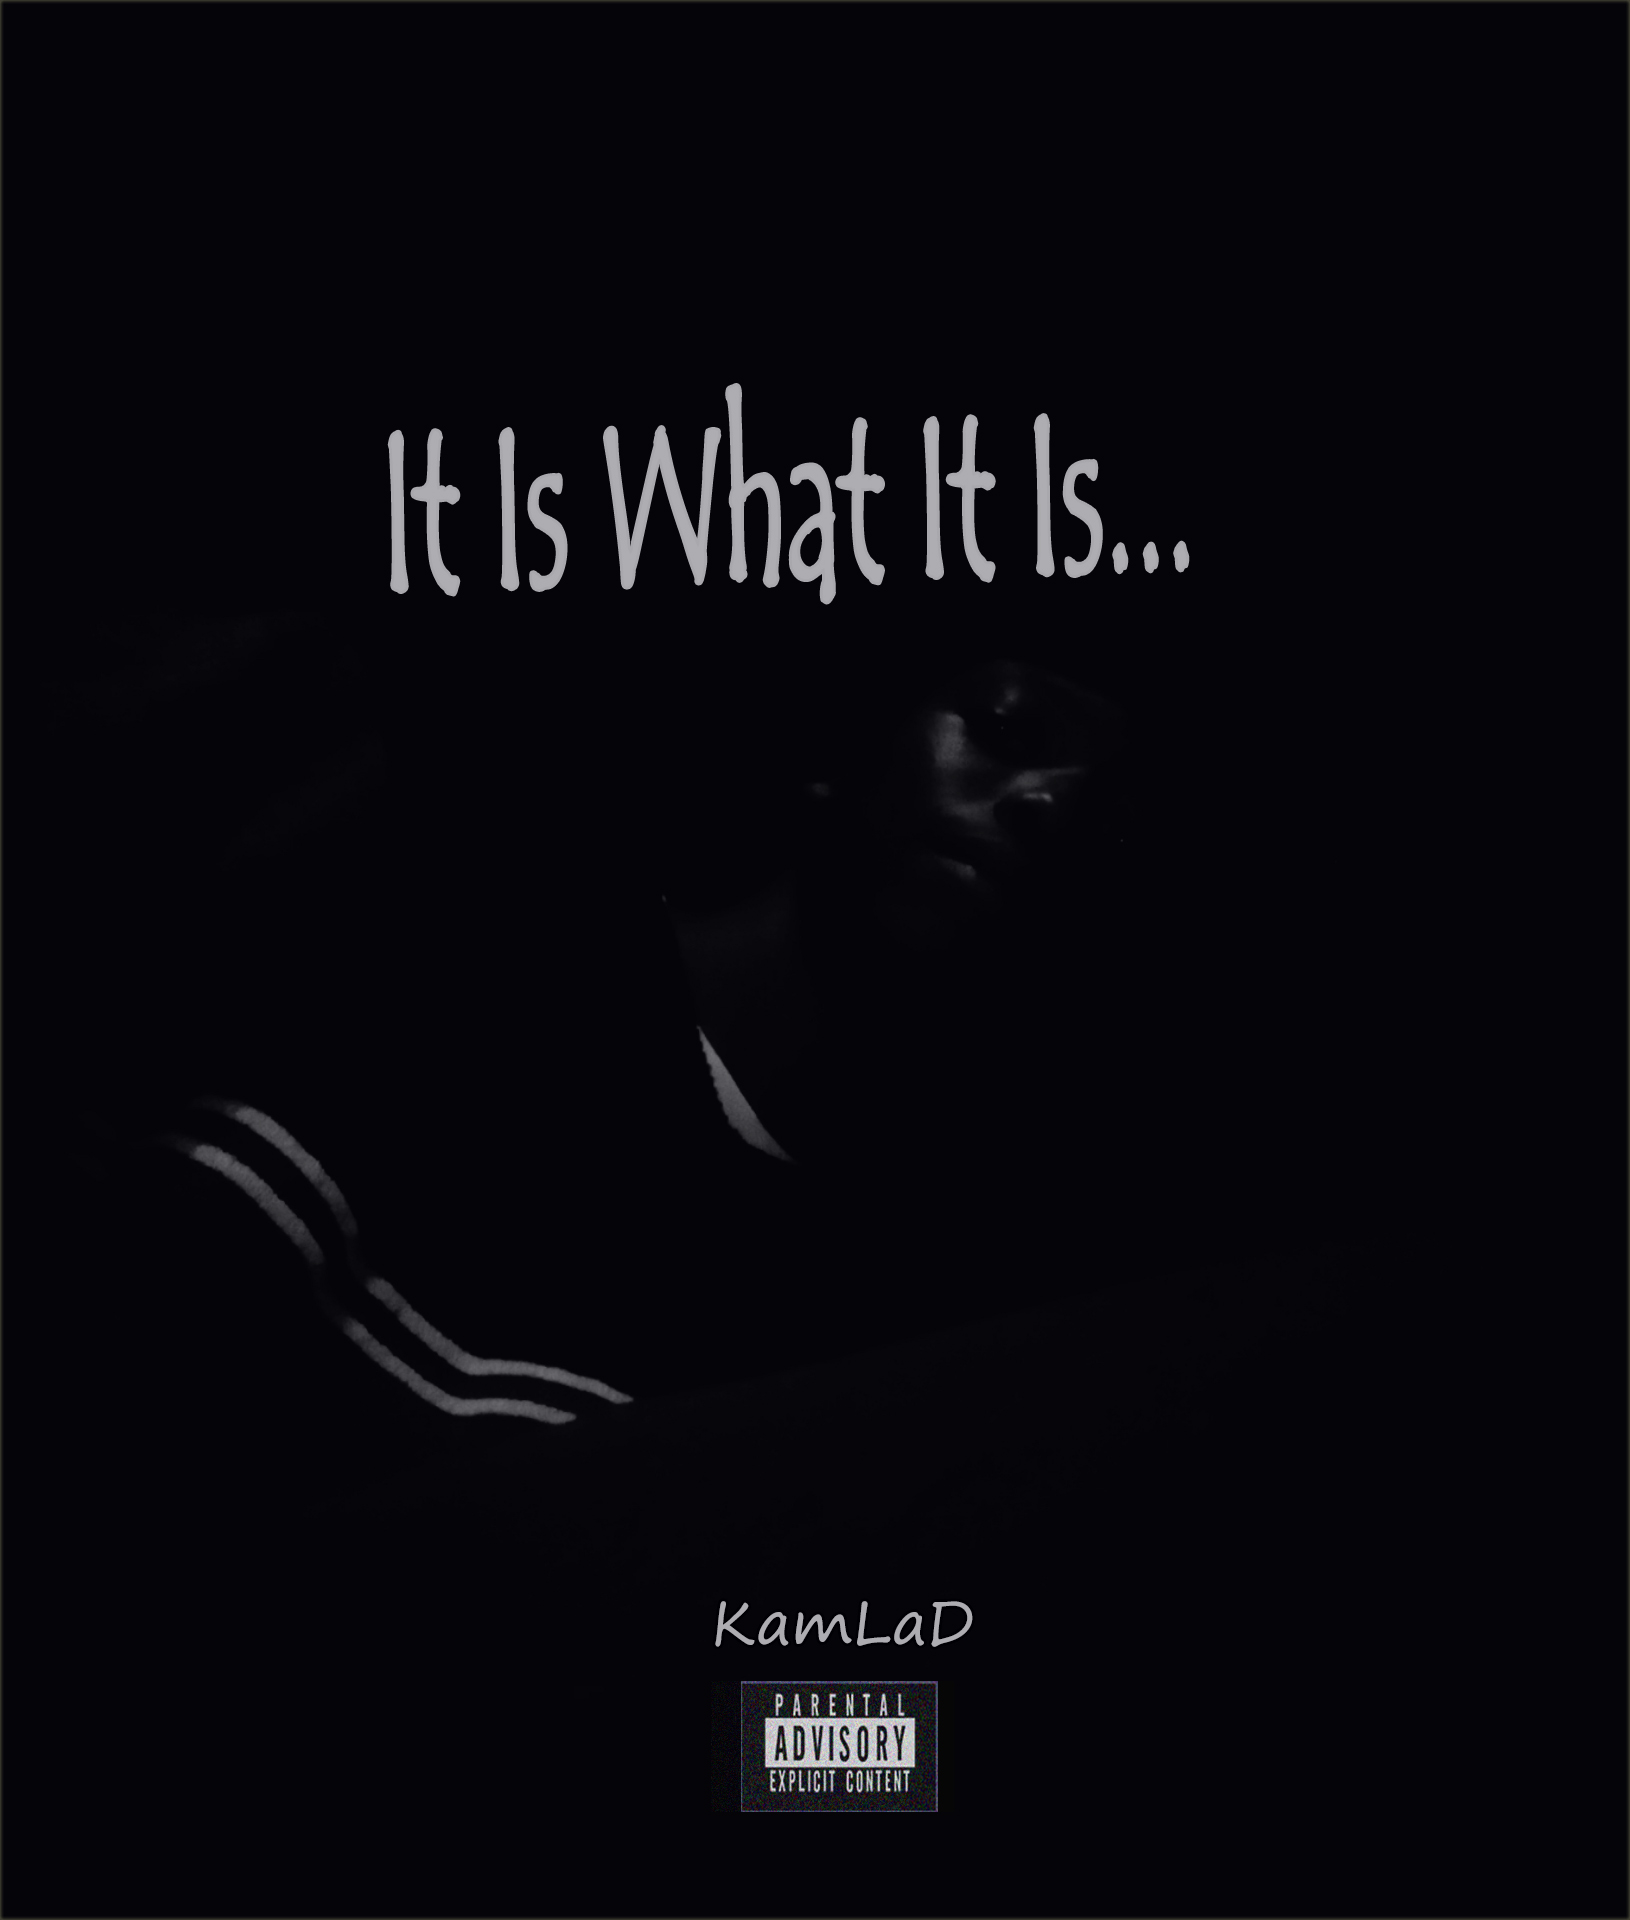 It Is What It Is by Kamlad kaylad | Album